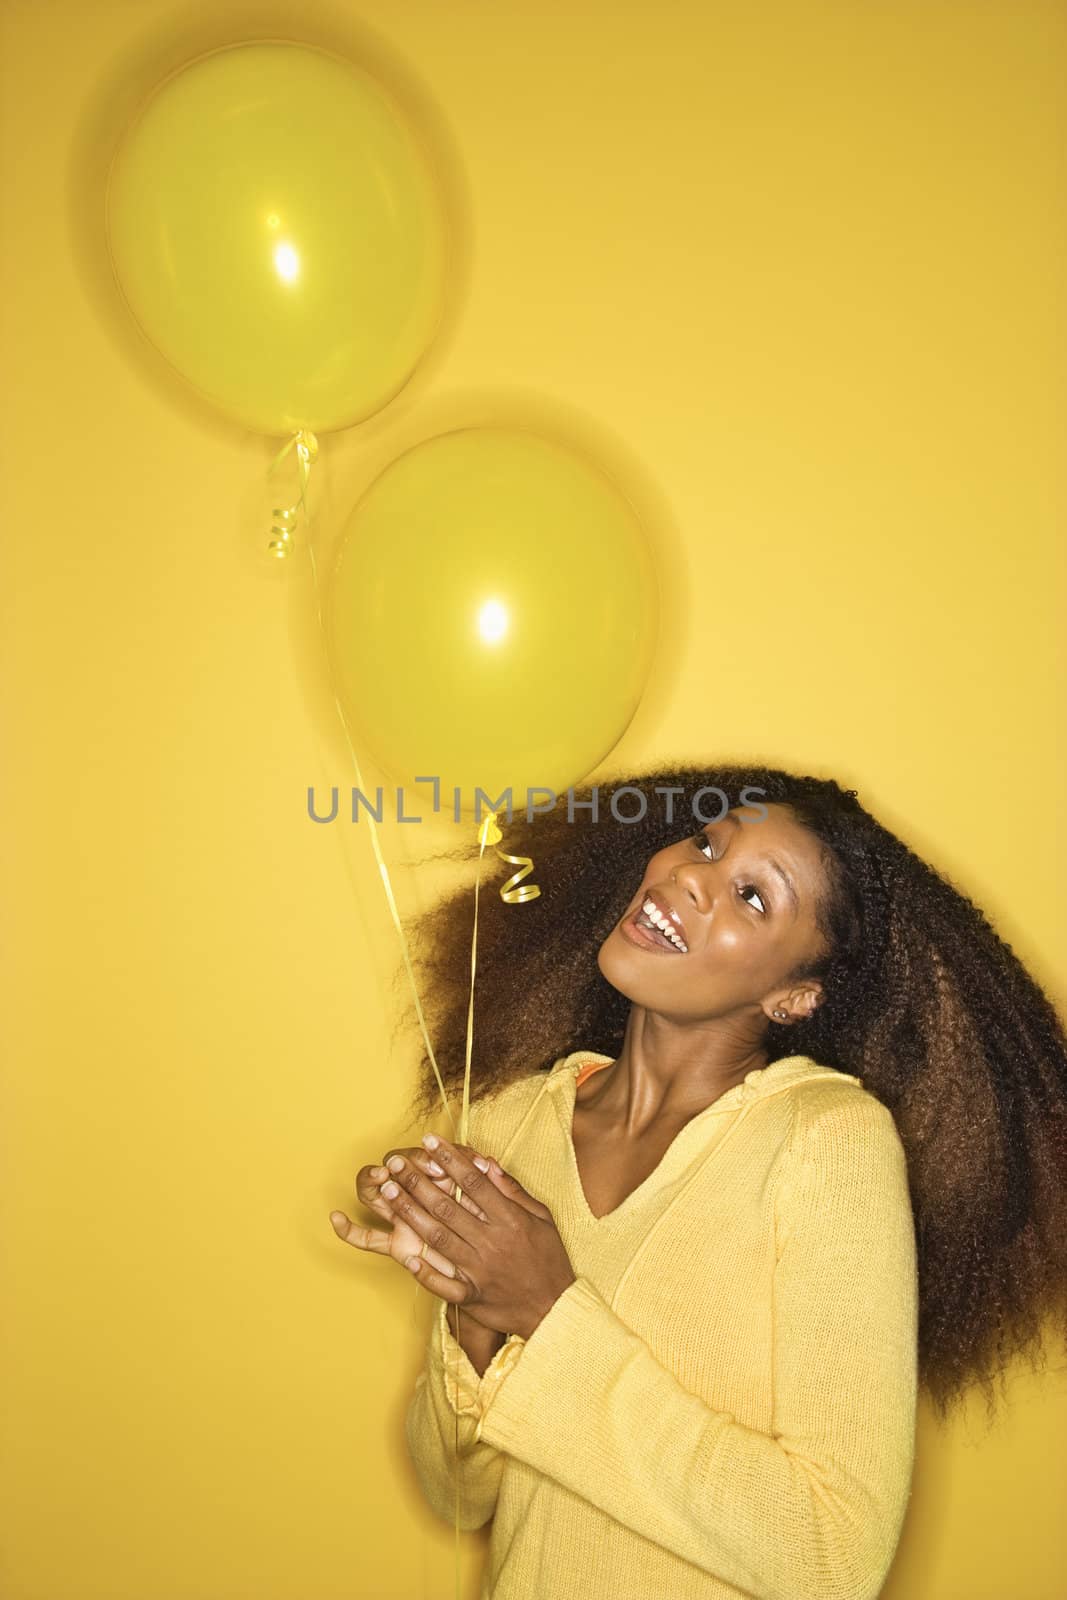 Portrait of smiling young African-American adult woman on yellow background holding balloons.